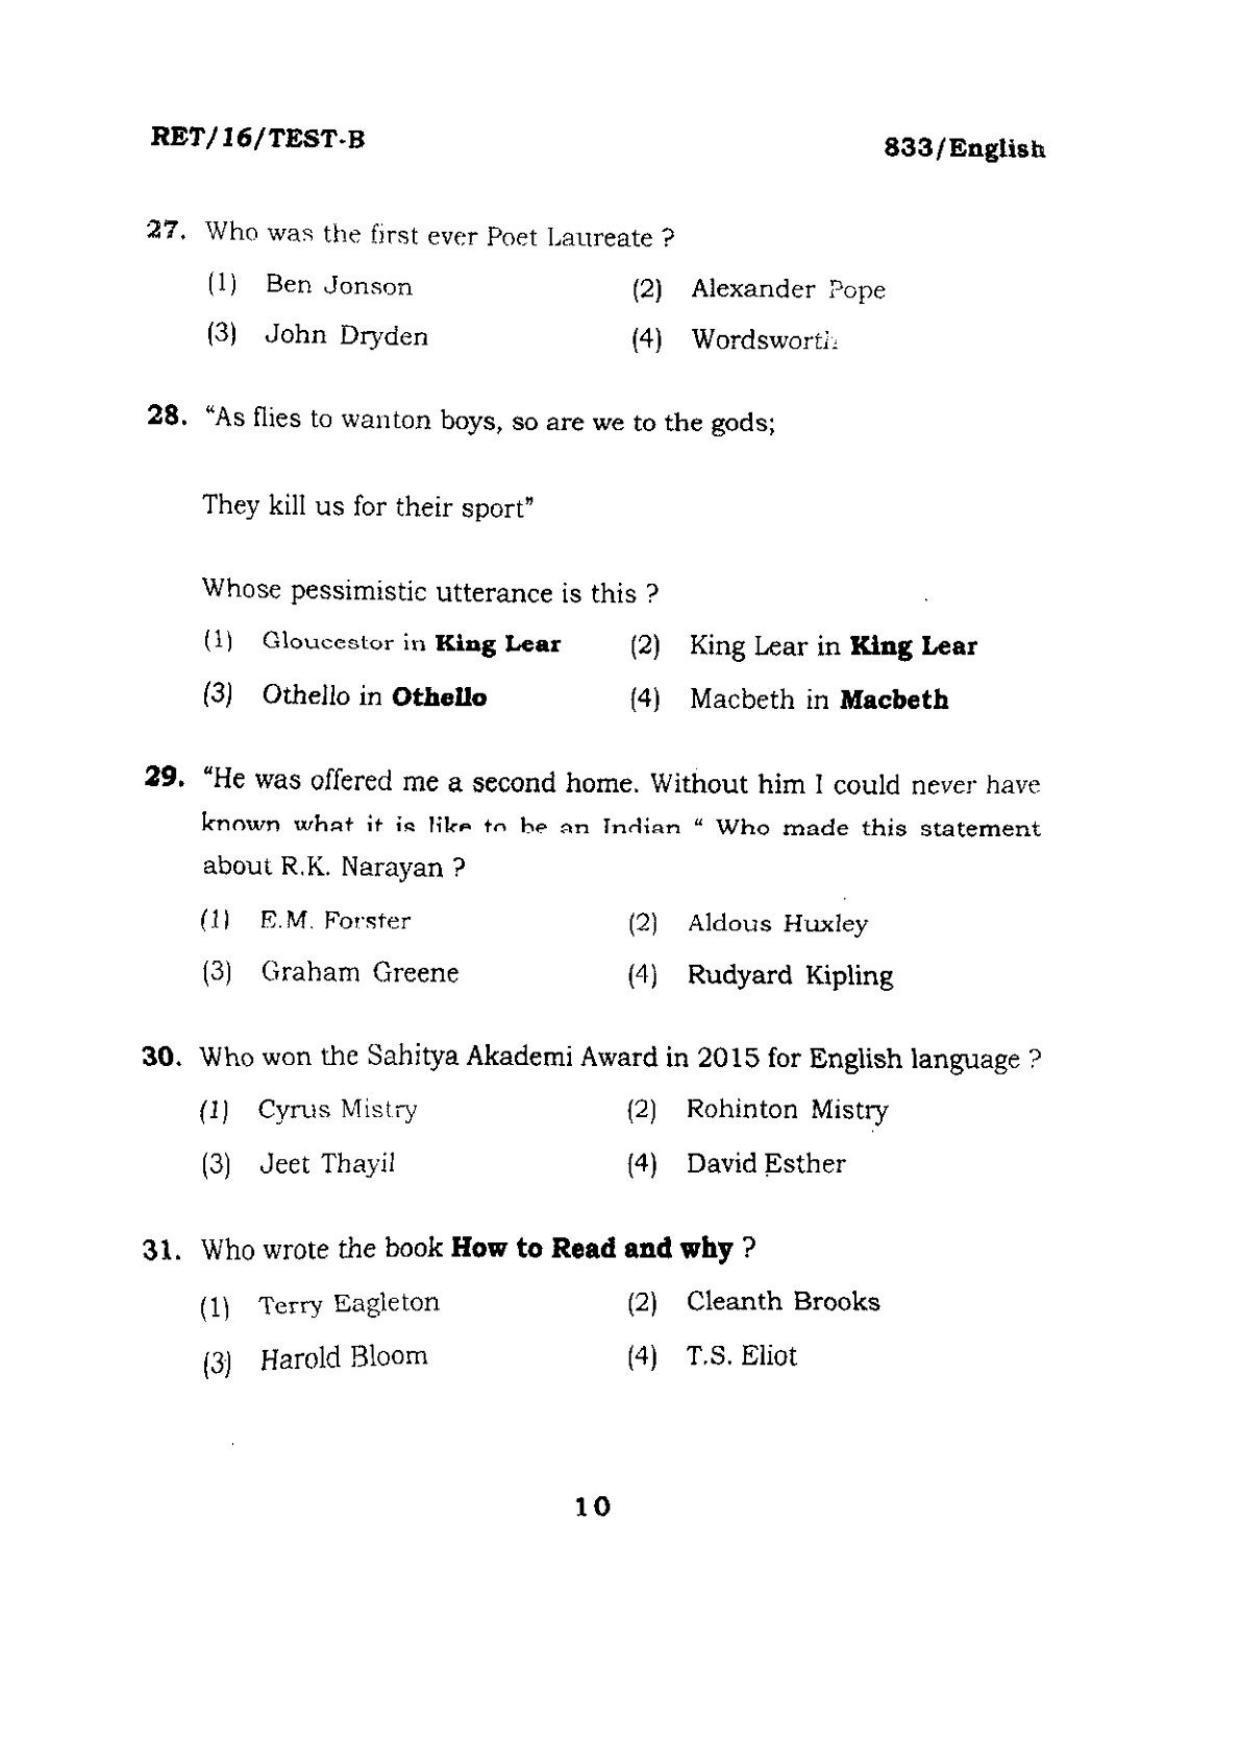 BHU RET ENGLISH 2016 Question Paper - Page 10